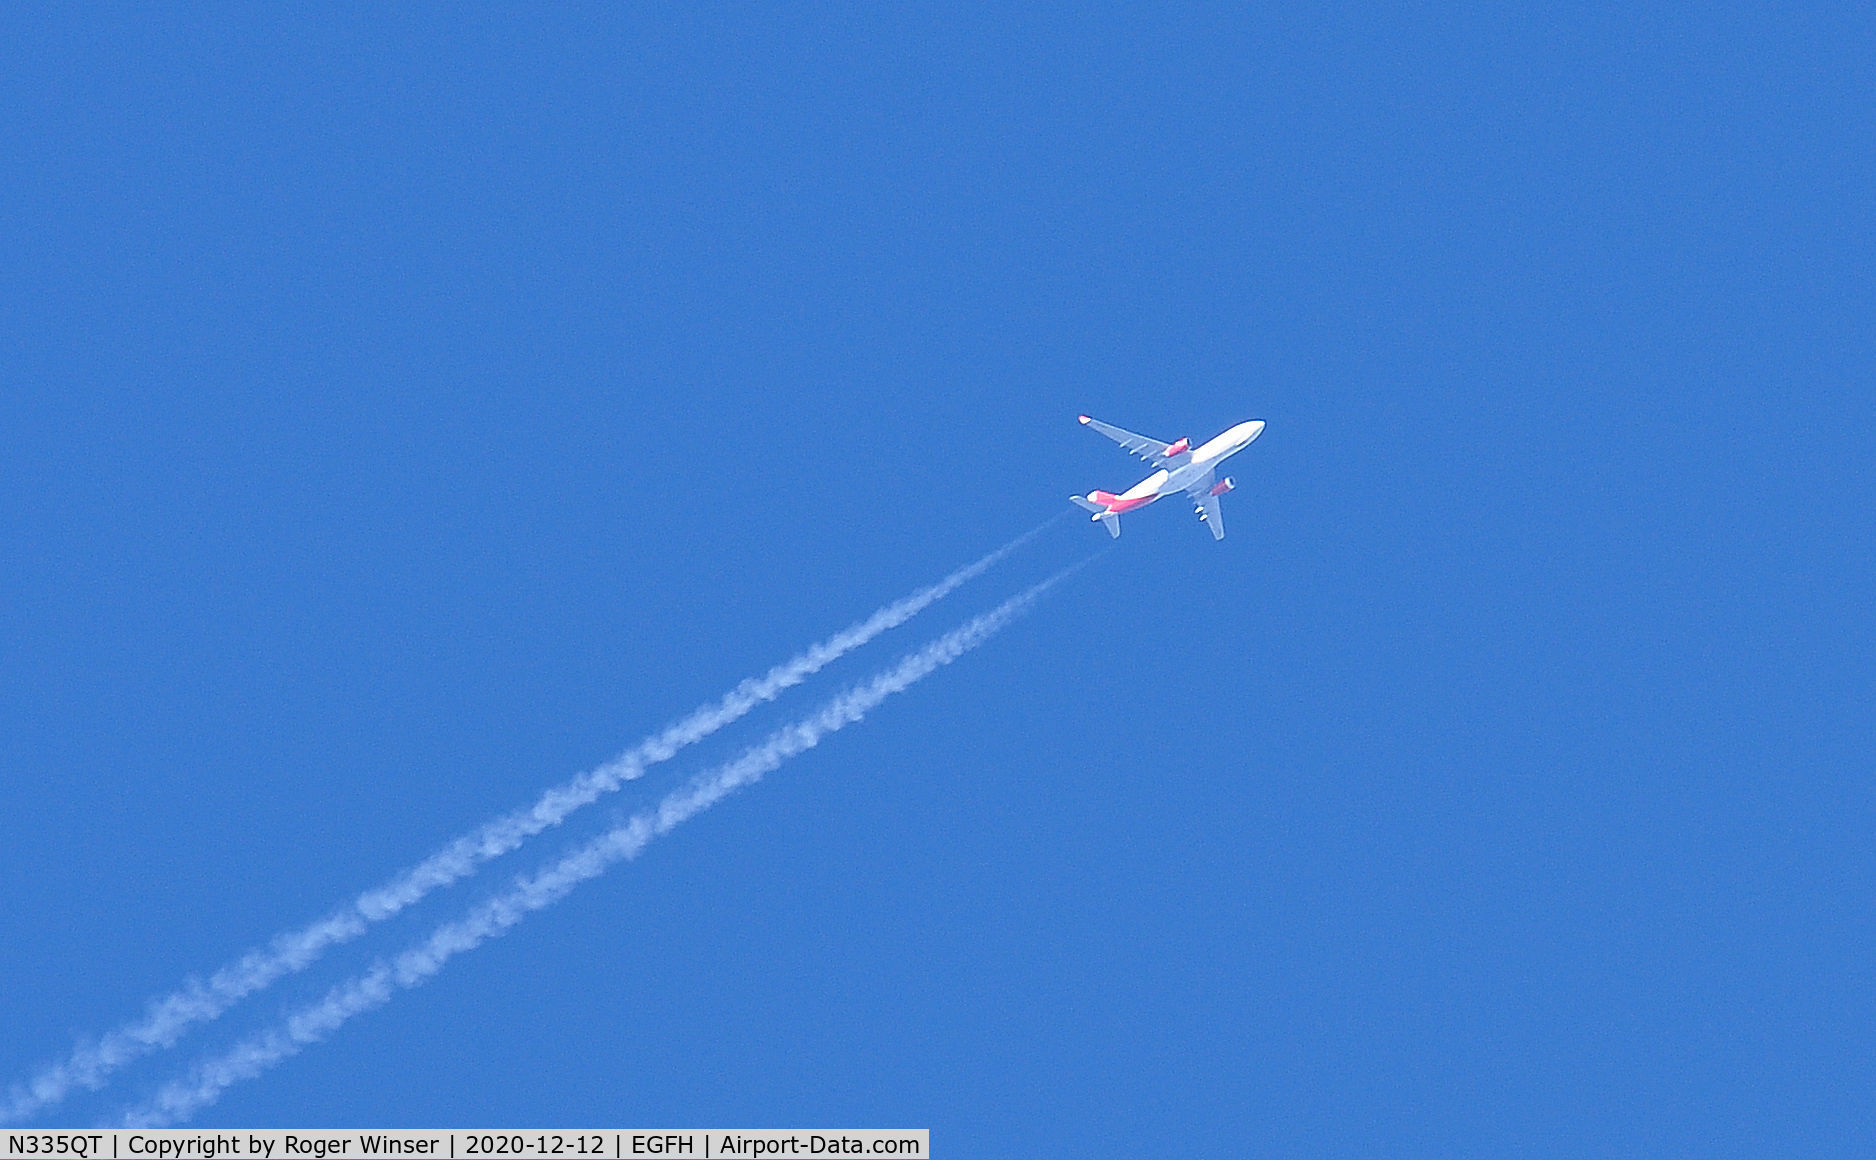 N335QT, 2014 Airbus A330-243F C/N 1534, Eastbound at 37000 feet over the airport. Operated by Avianca Cargo.